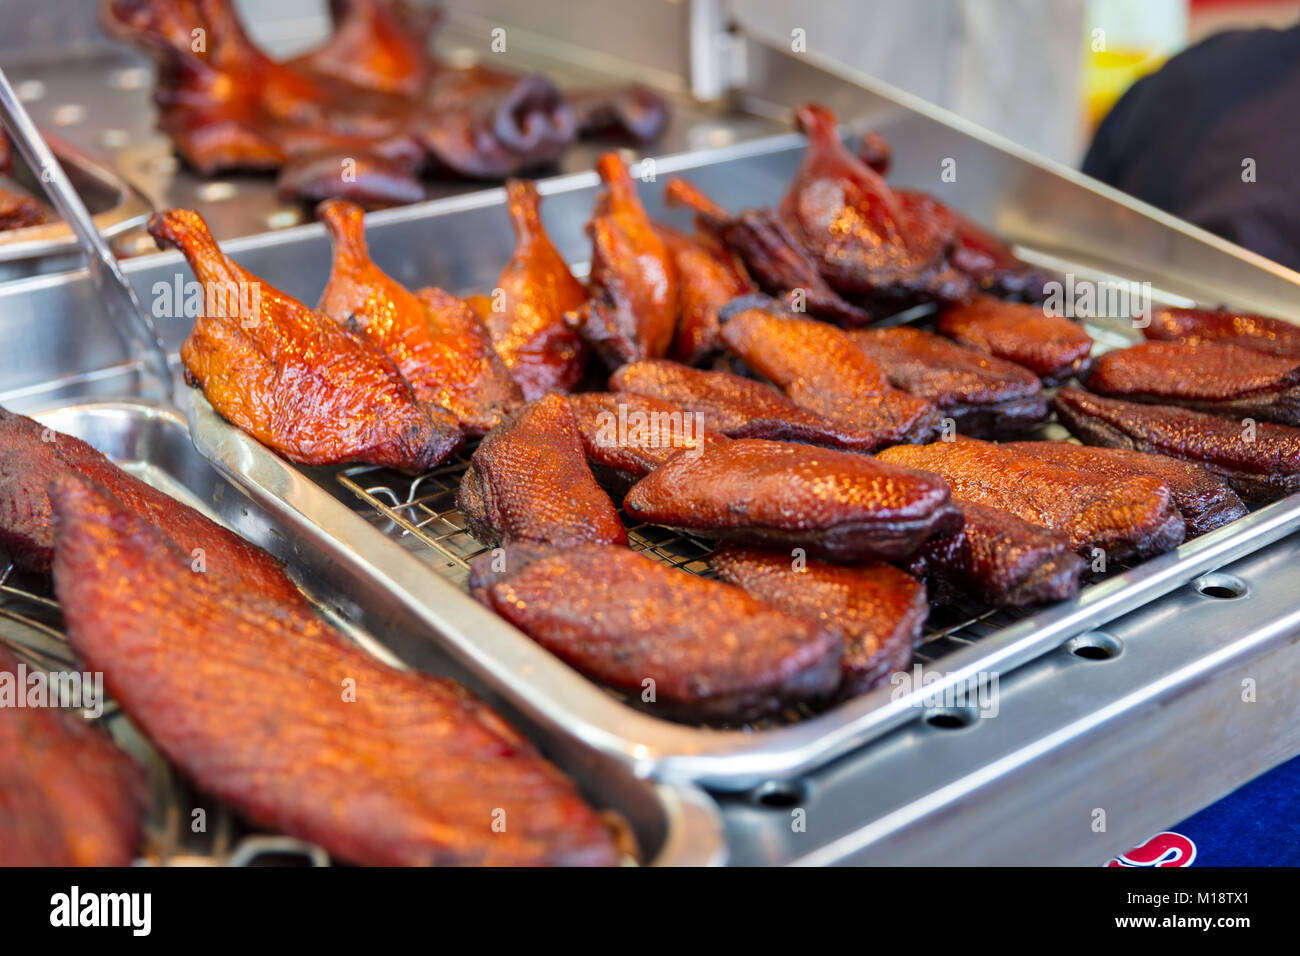 Roasted Duck At Street Market Stall Stock Photo